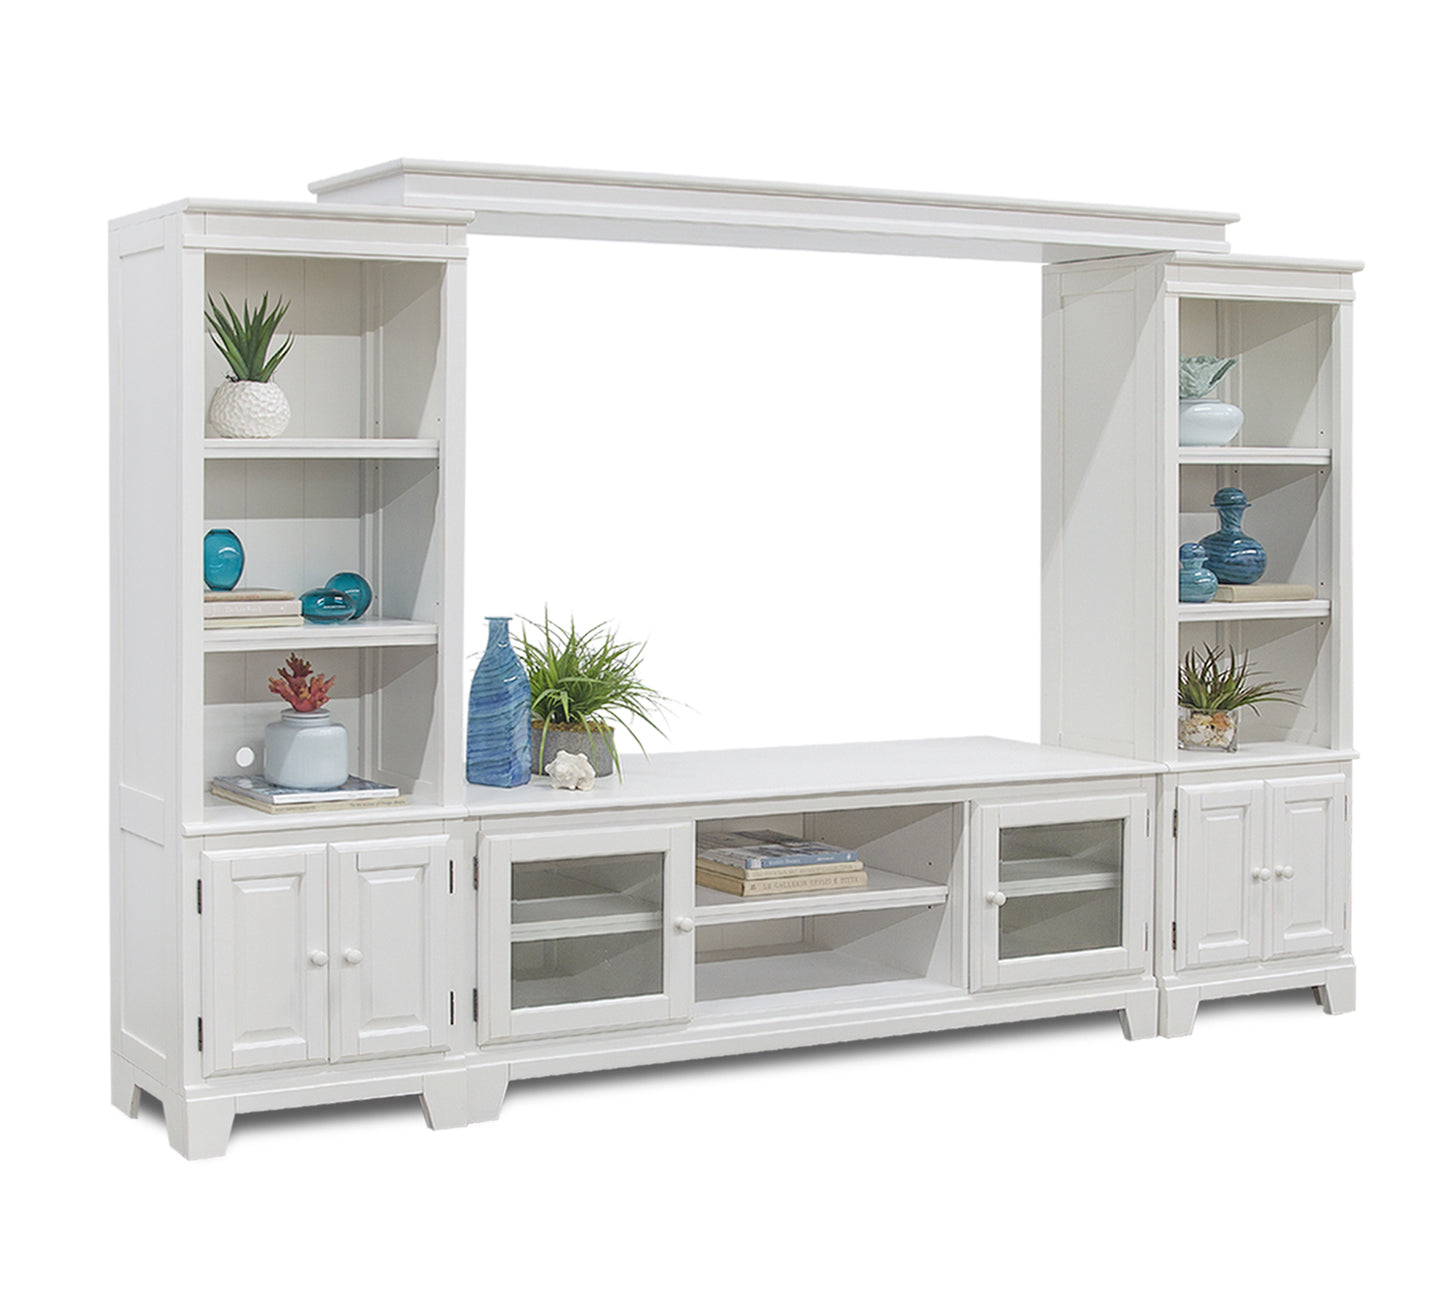 Crescent Bay II 4 Piece Wall Unit with 68" TV Console